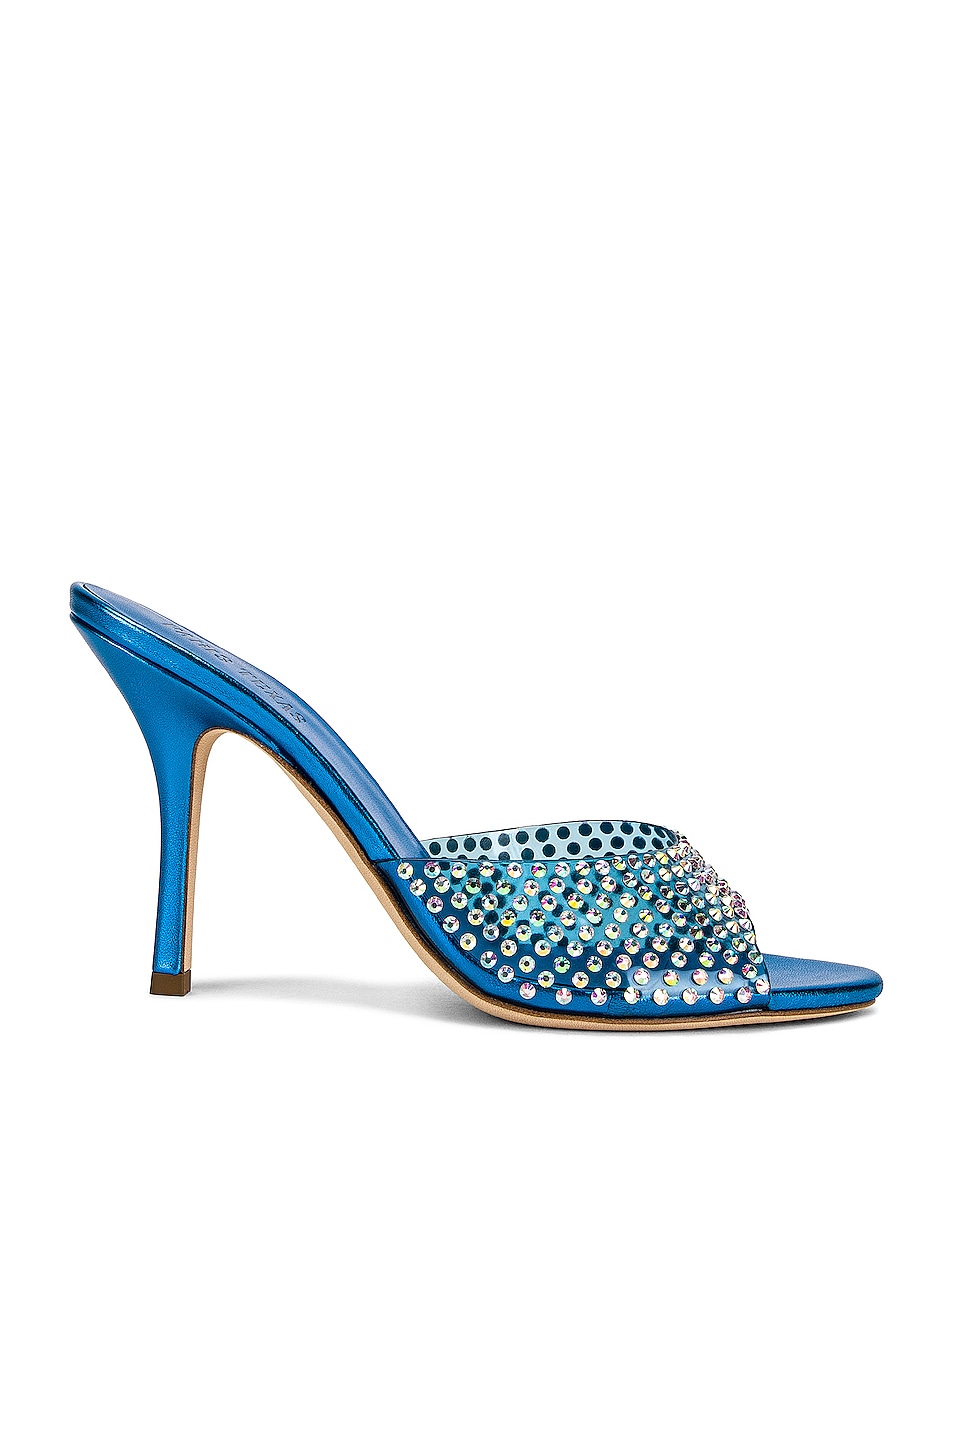 Image 1 of Paris Texas Holly Penelope 95 PVC Mule in Iridescent Blue